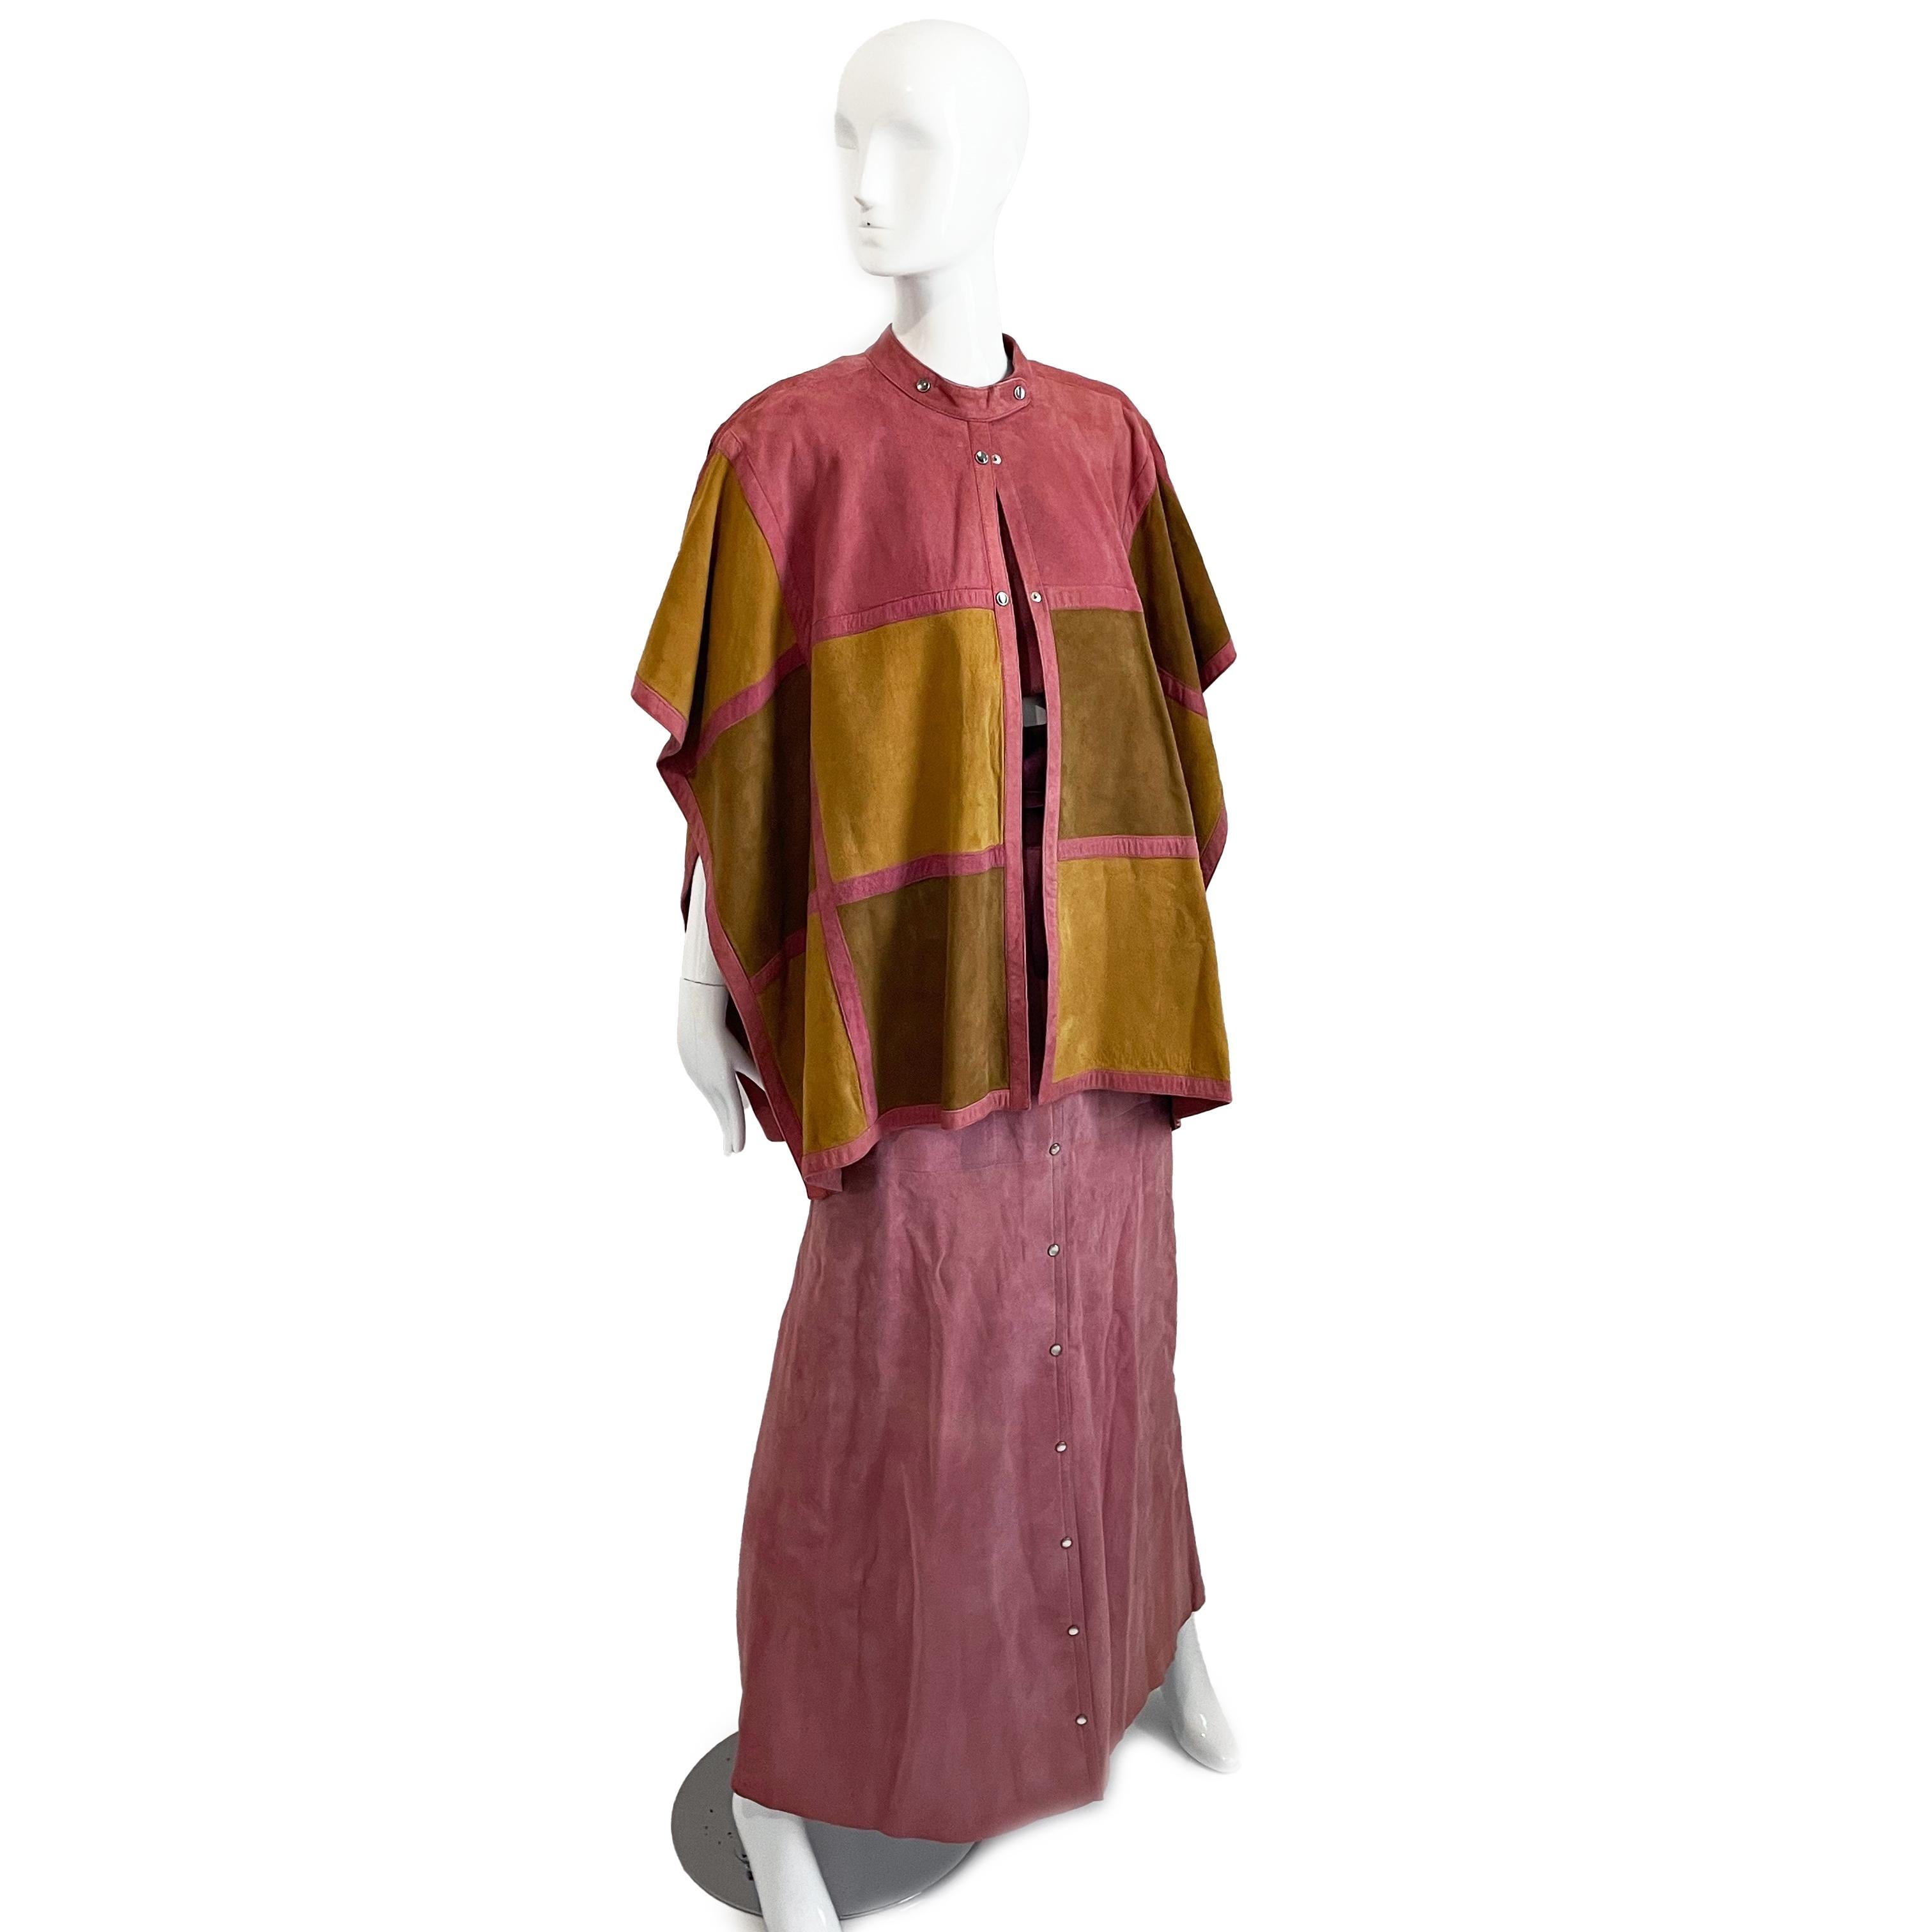 Preowned, vintage Bonnie Cashin for Sills suede patchwork poncho or cape, likely made in the 70s.  

Made from shades of dusty rose, butterscotch and olive-hued caramel suede leather patchwork, it fastens with pearlized snaps at the collar and